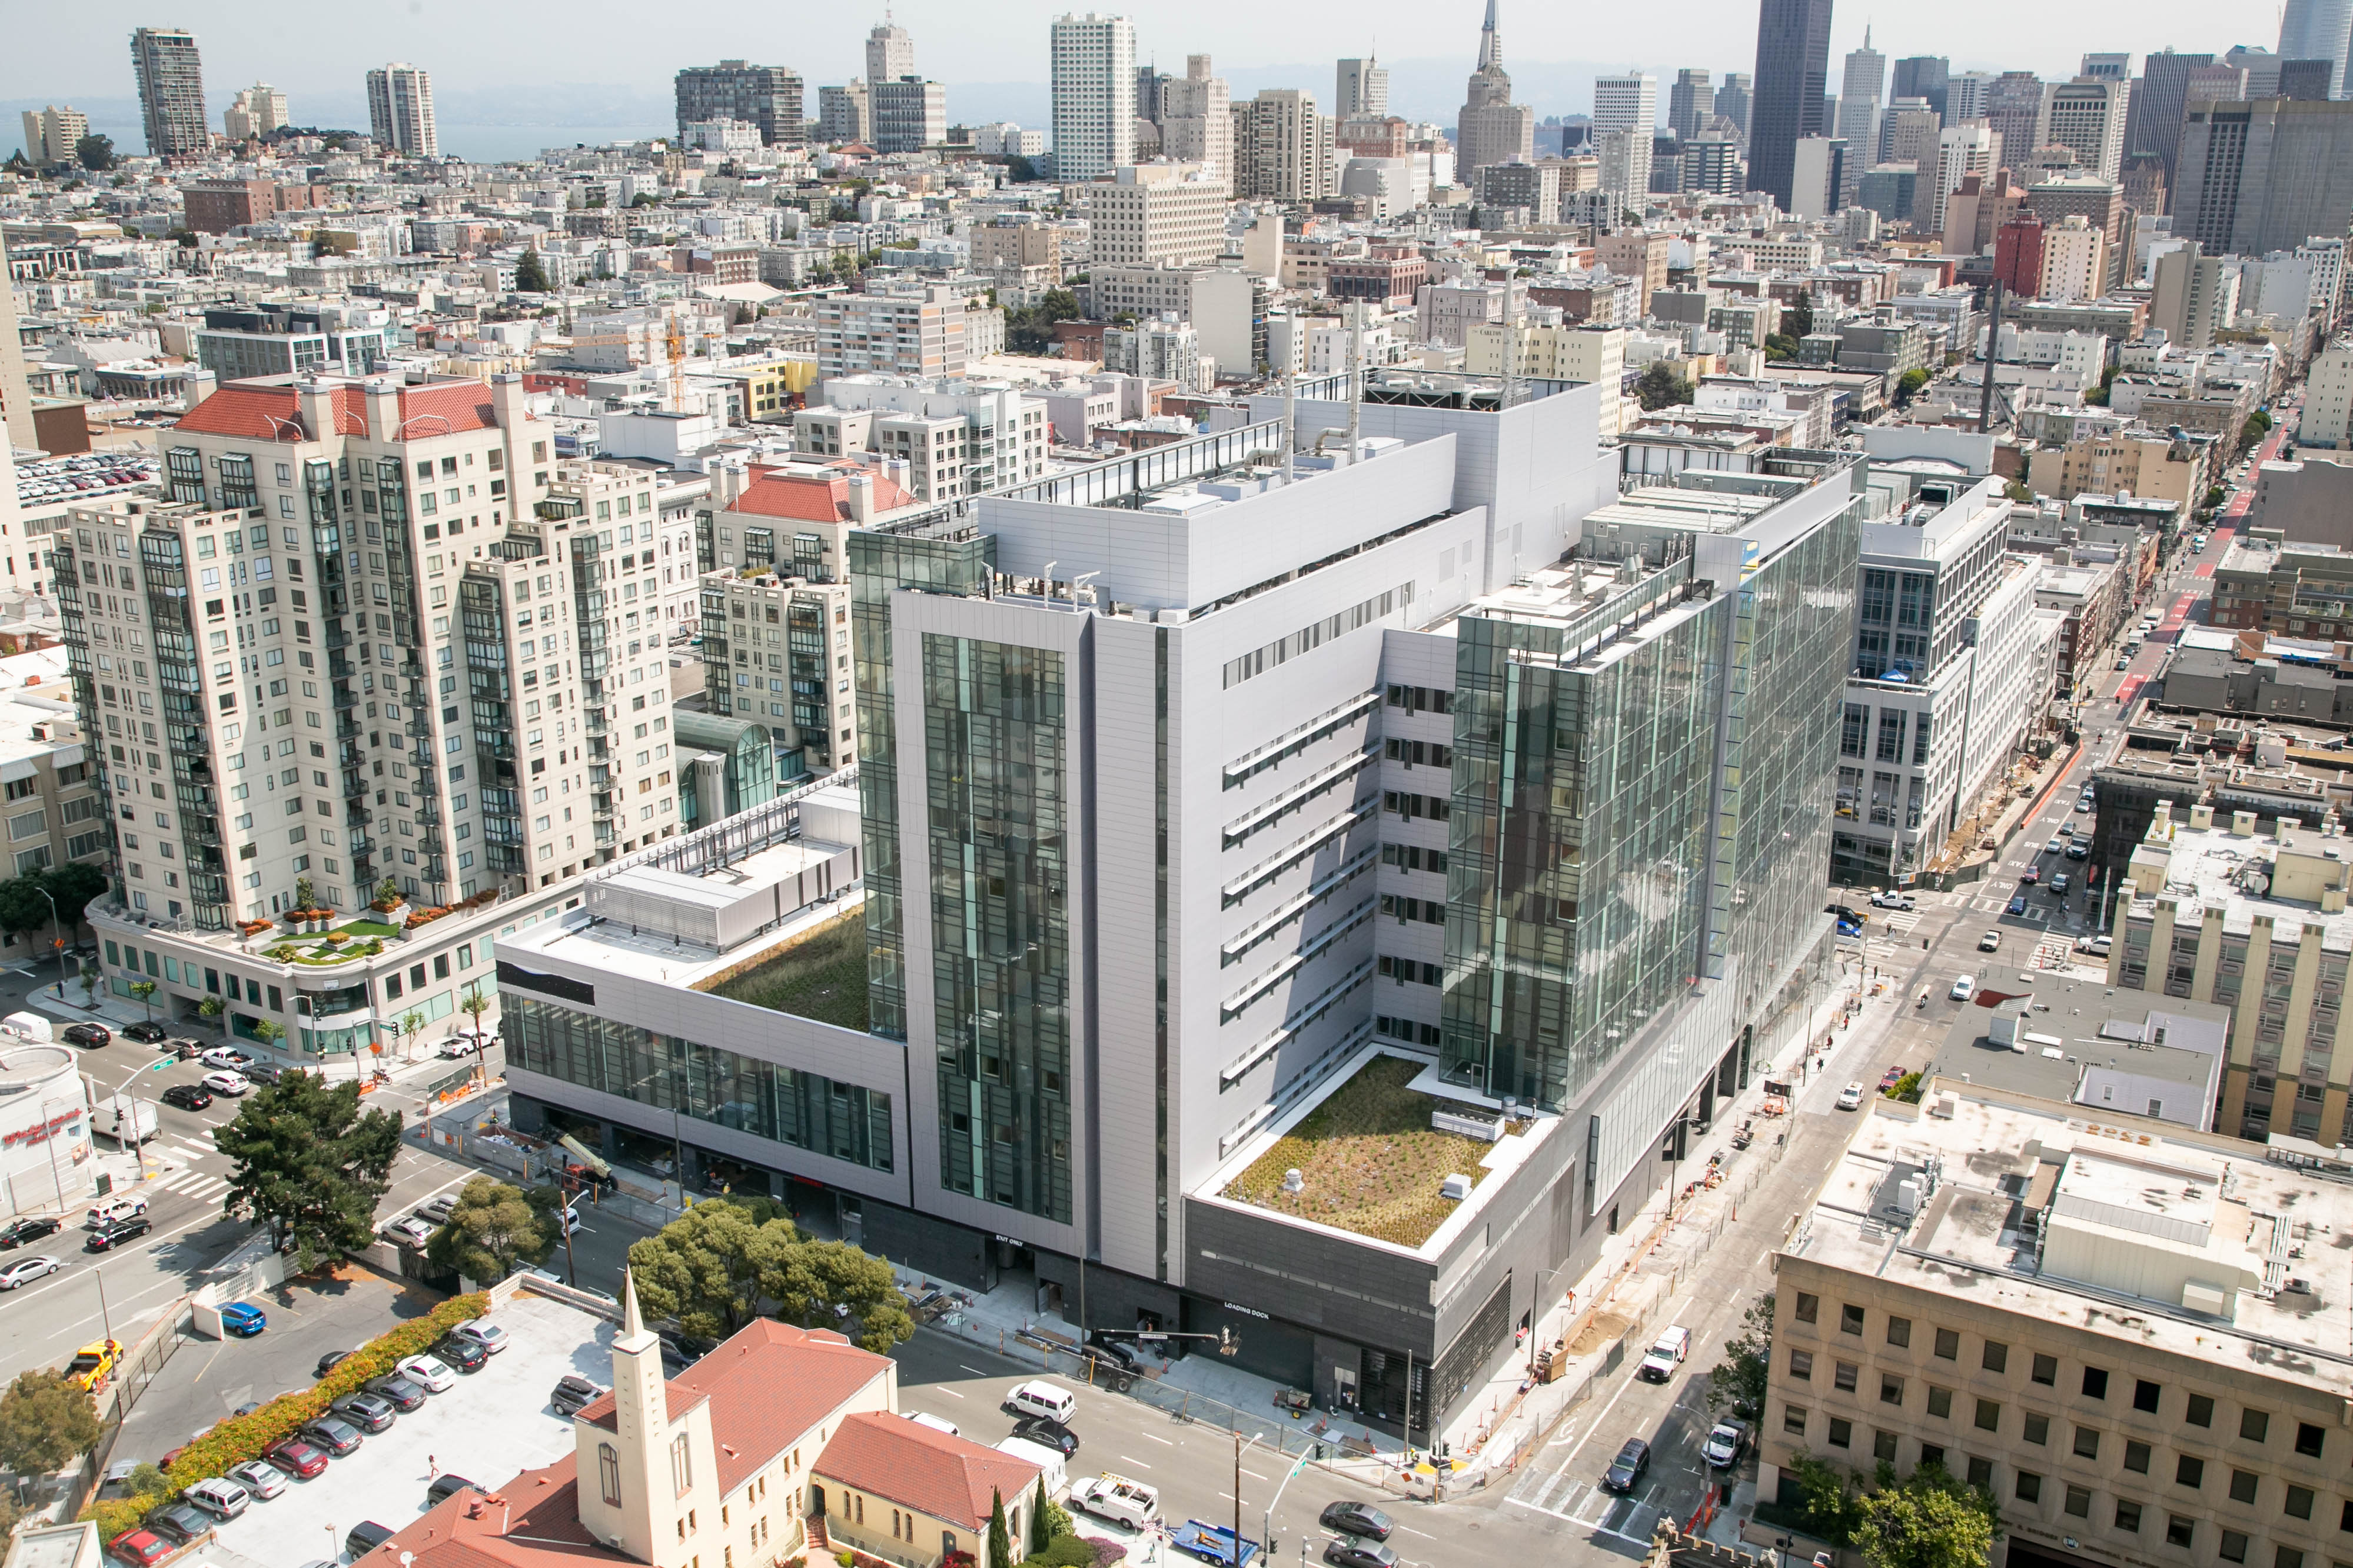 Sutter's new, 1 million square-foot California Pacific Medical Center (CPMC) Van Ness Campus hospital, located at 1101 Van Ness Ave. at the intersection of Geary Blvd. in San Francisco. 